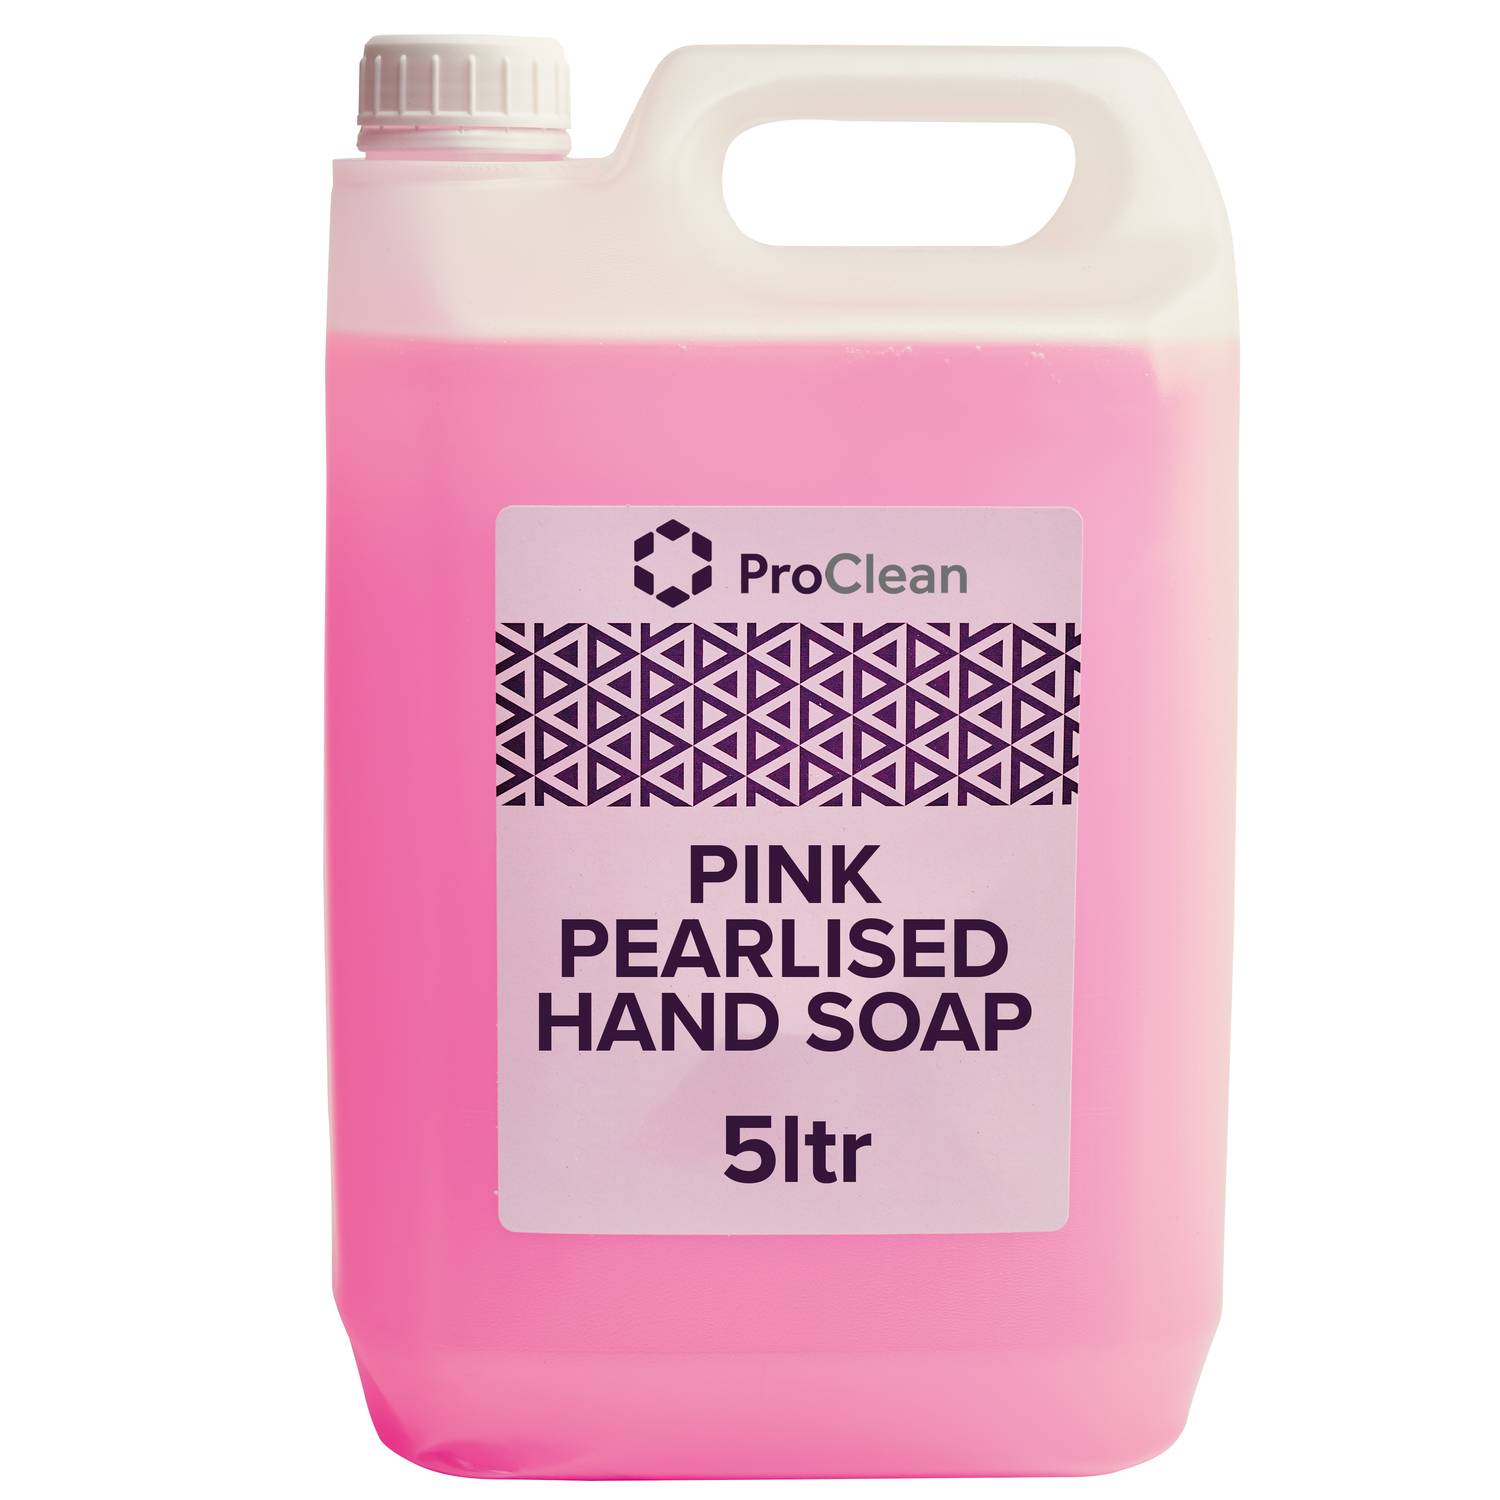 ProClean Pink Pearlised Hand Soap (2 x 5L)